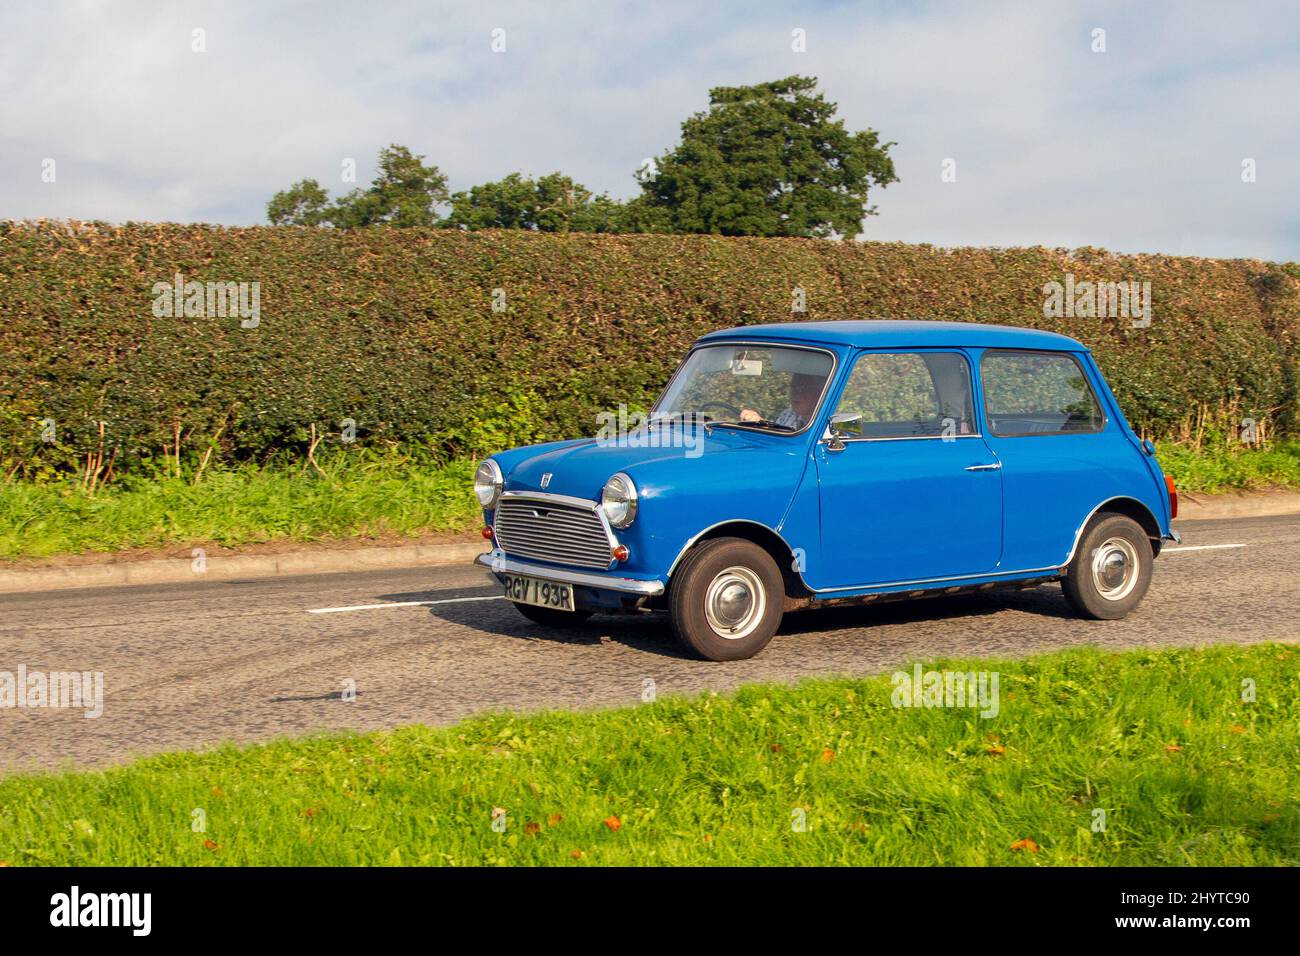 1976 70s seventies British Leyland cars blue Mini 850, 848cc petrol small city car en-route to Capesthorne Hall classic August car show, Cheshire, UK Stock Photo